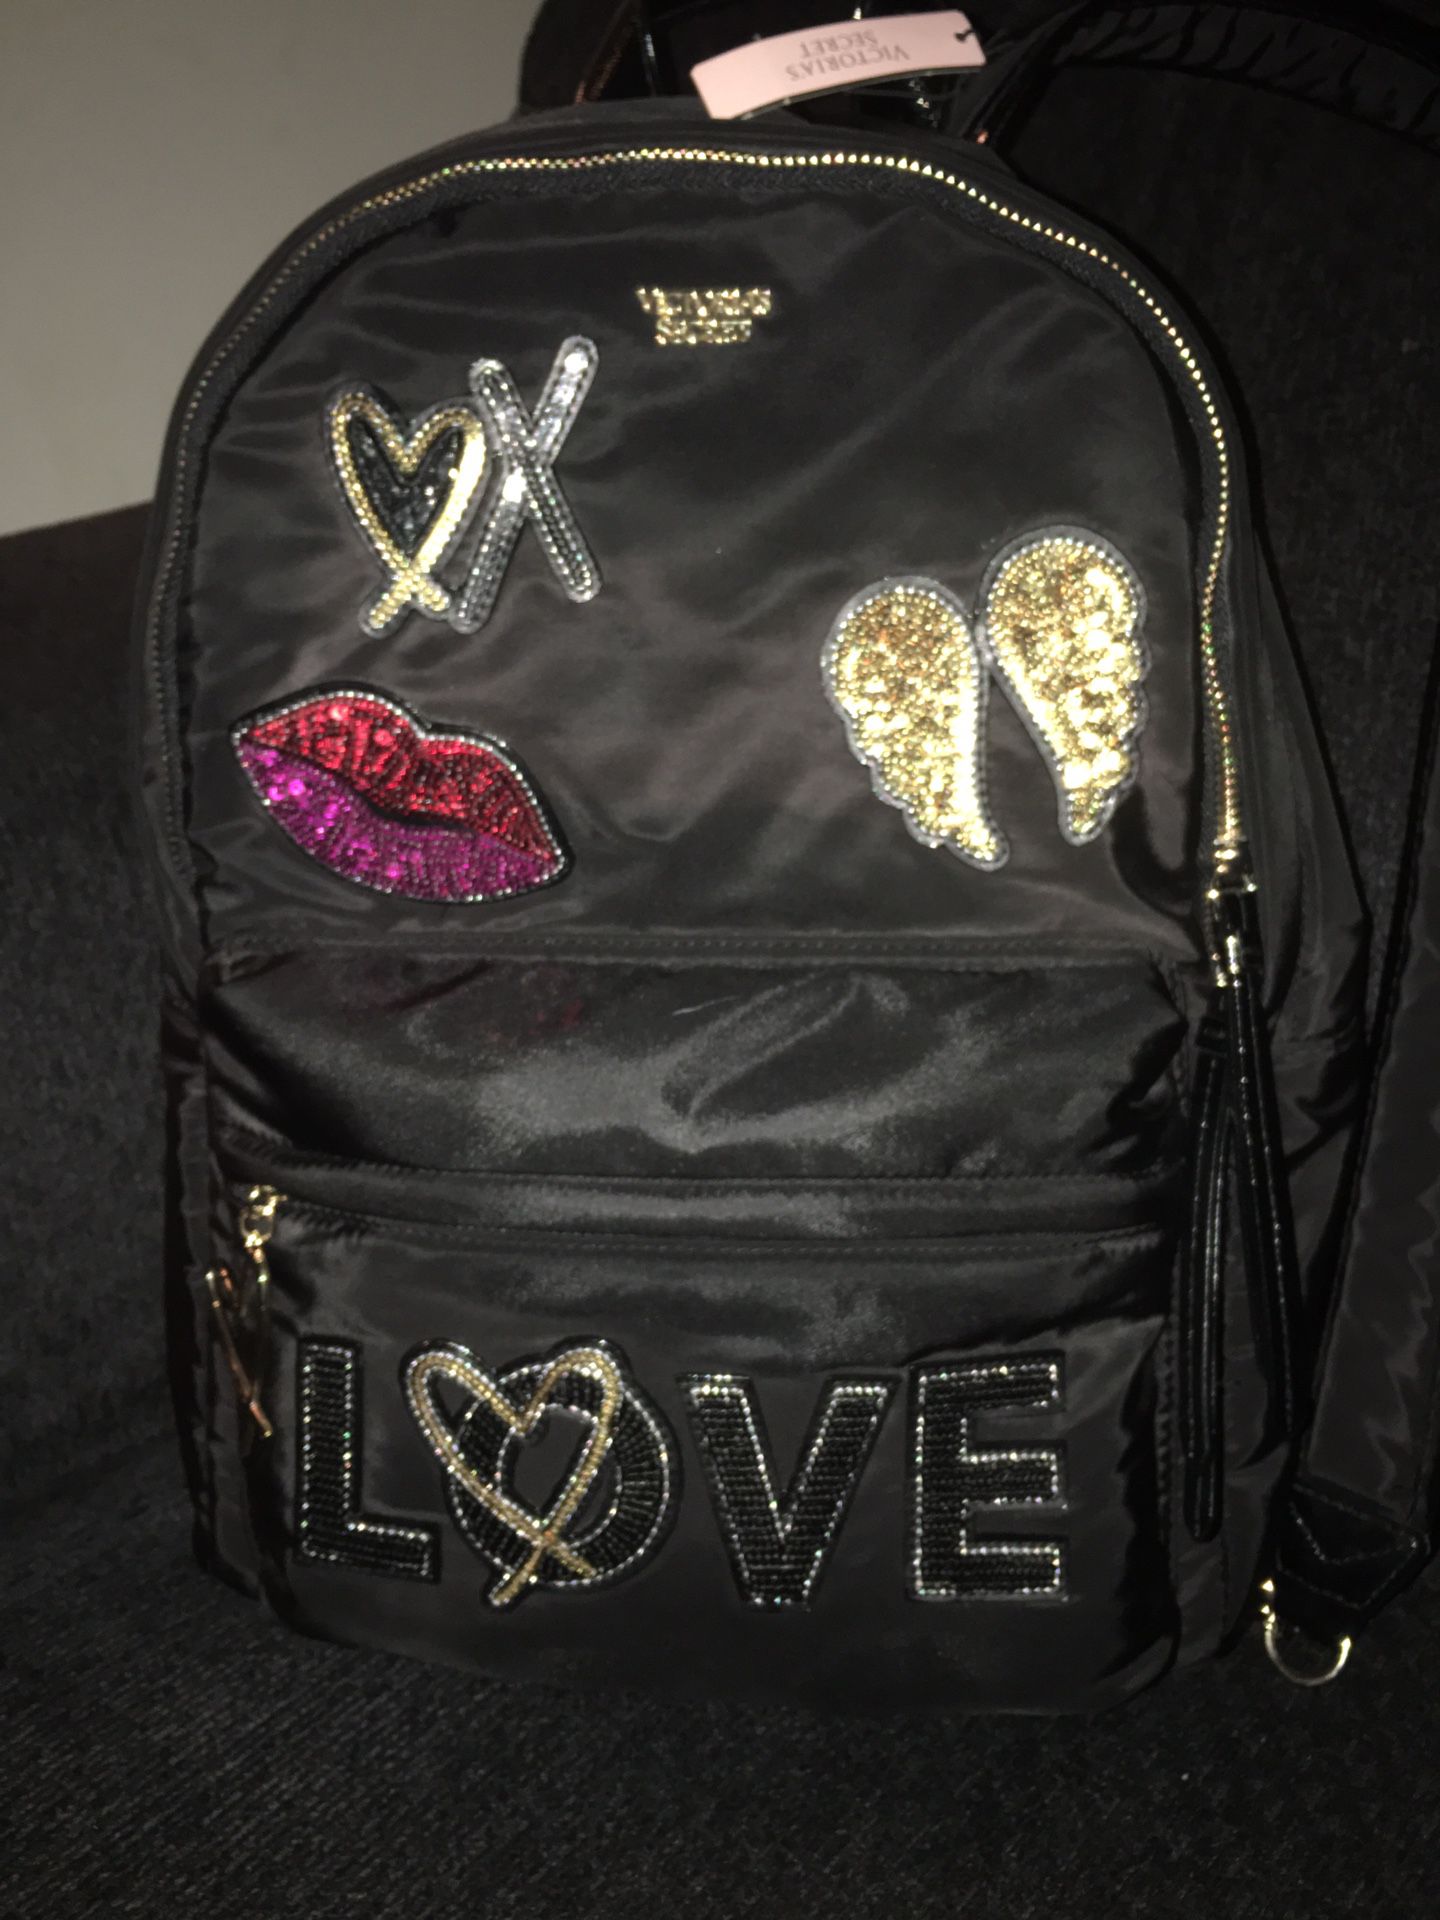 Victoria secrets medium size backpack black with sequence!! NEW